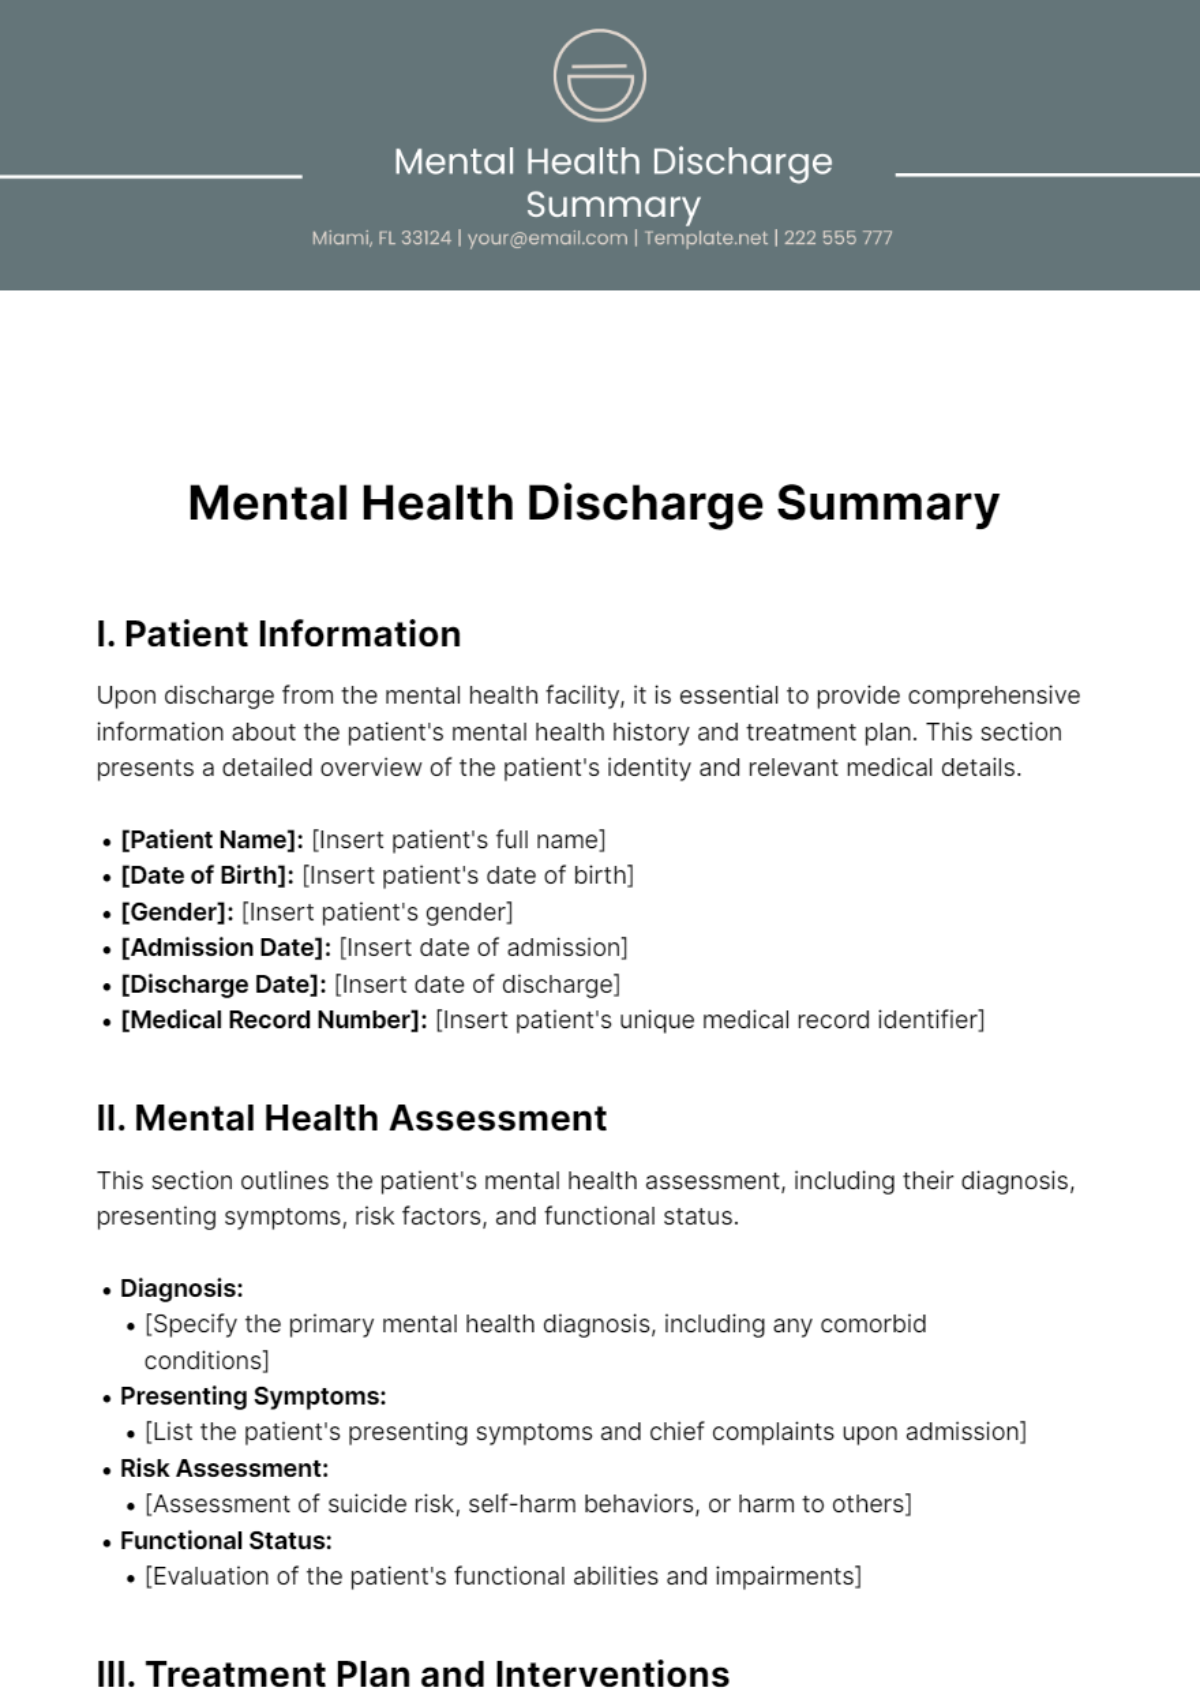 Mental Health Discharge Summary Template